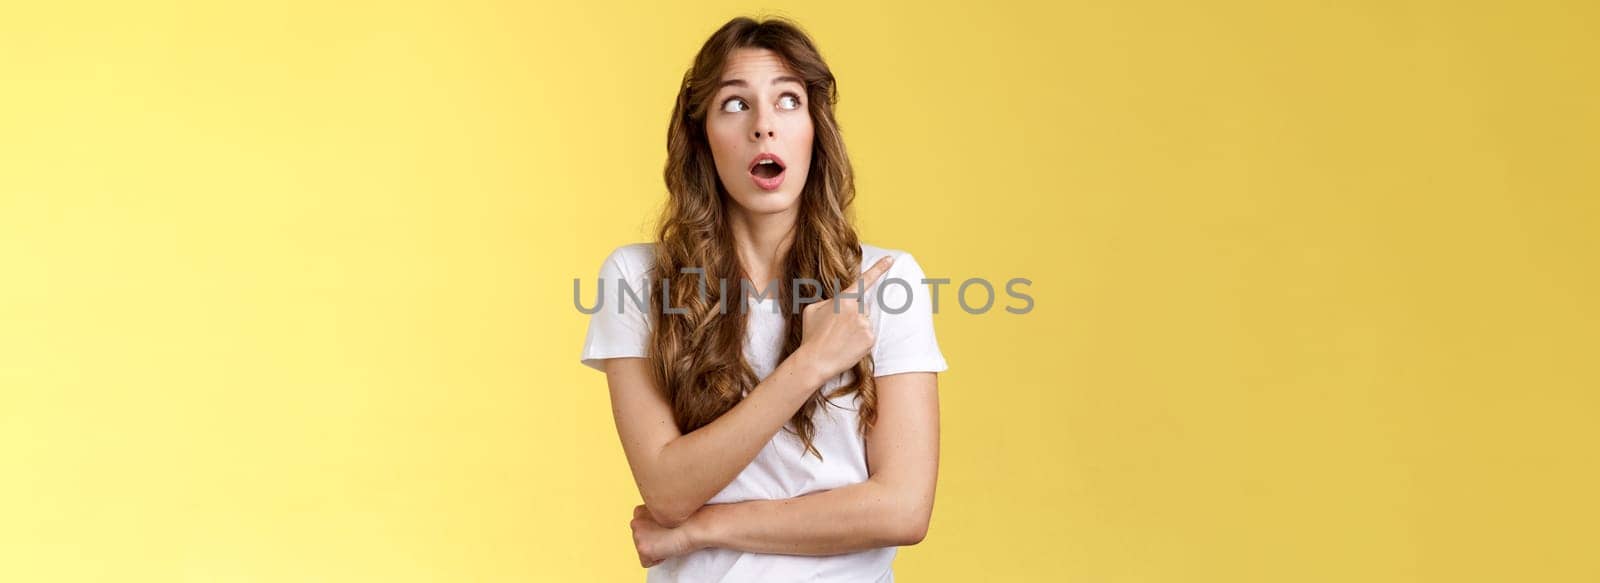 Omg wow no way. Impressed speechless stunned pretty european girl drop jaw astonished open mouth intrigued stare pointing upper left corner admiration surprised glancing curiously yellow background.